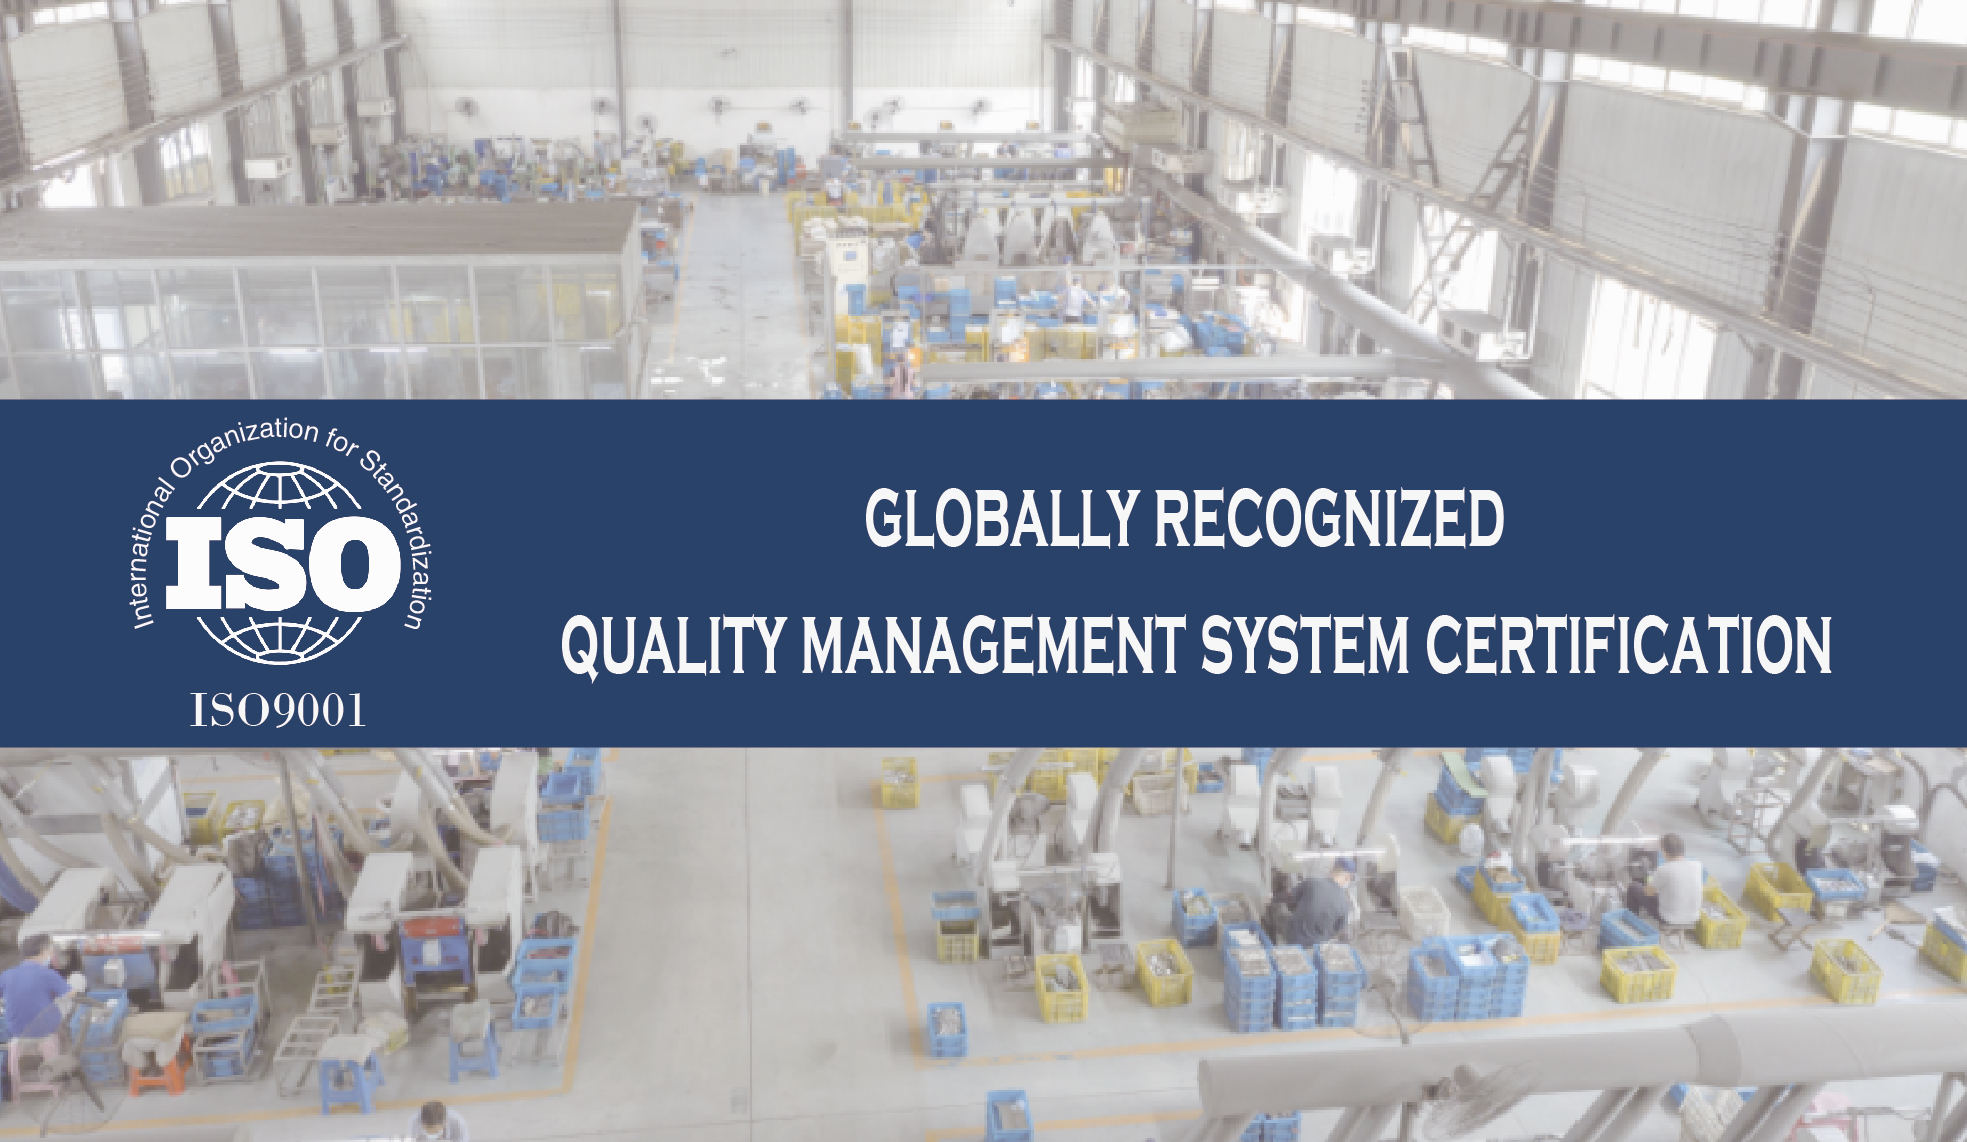 Our factory achieves ISO 9001 Quality Management System Certification for the Year 2023